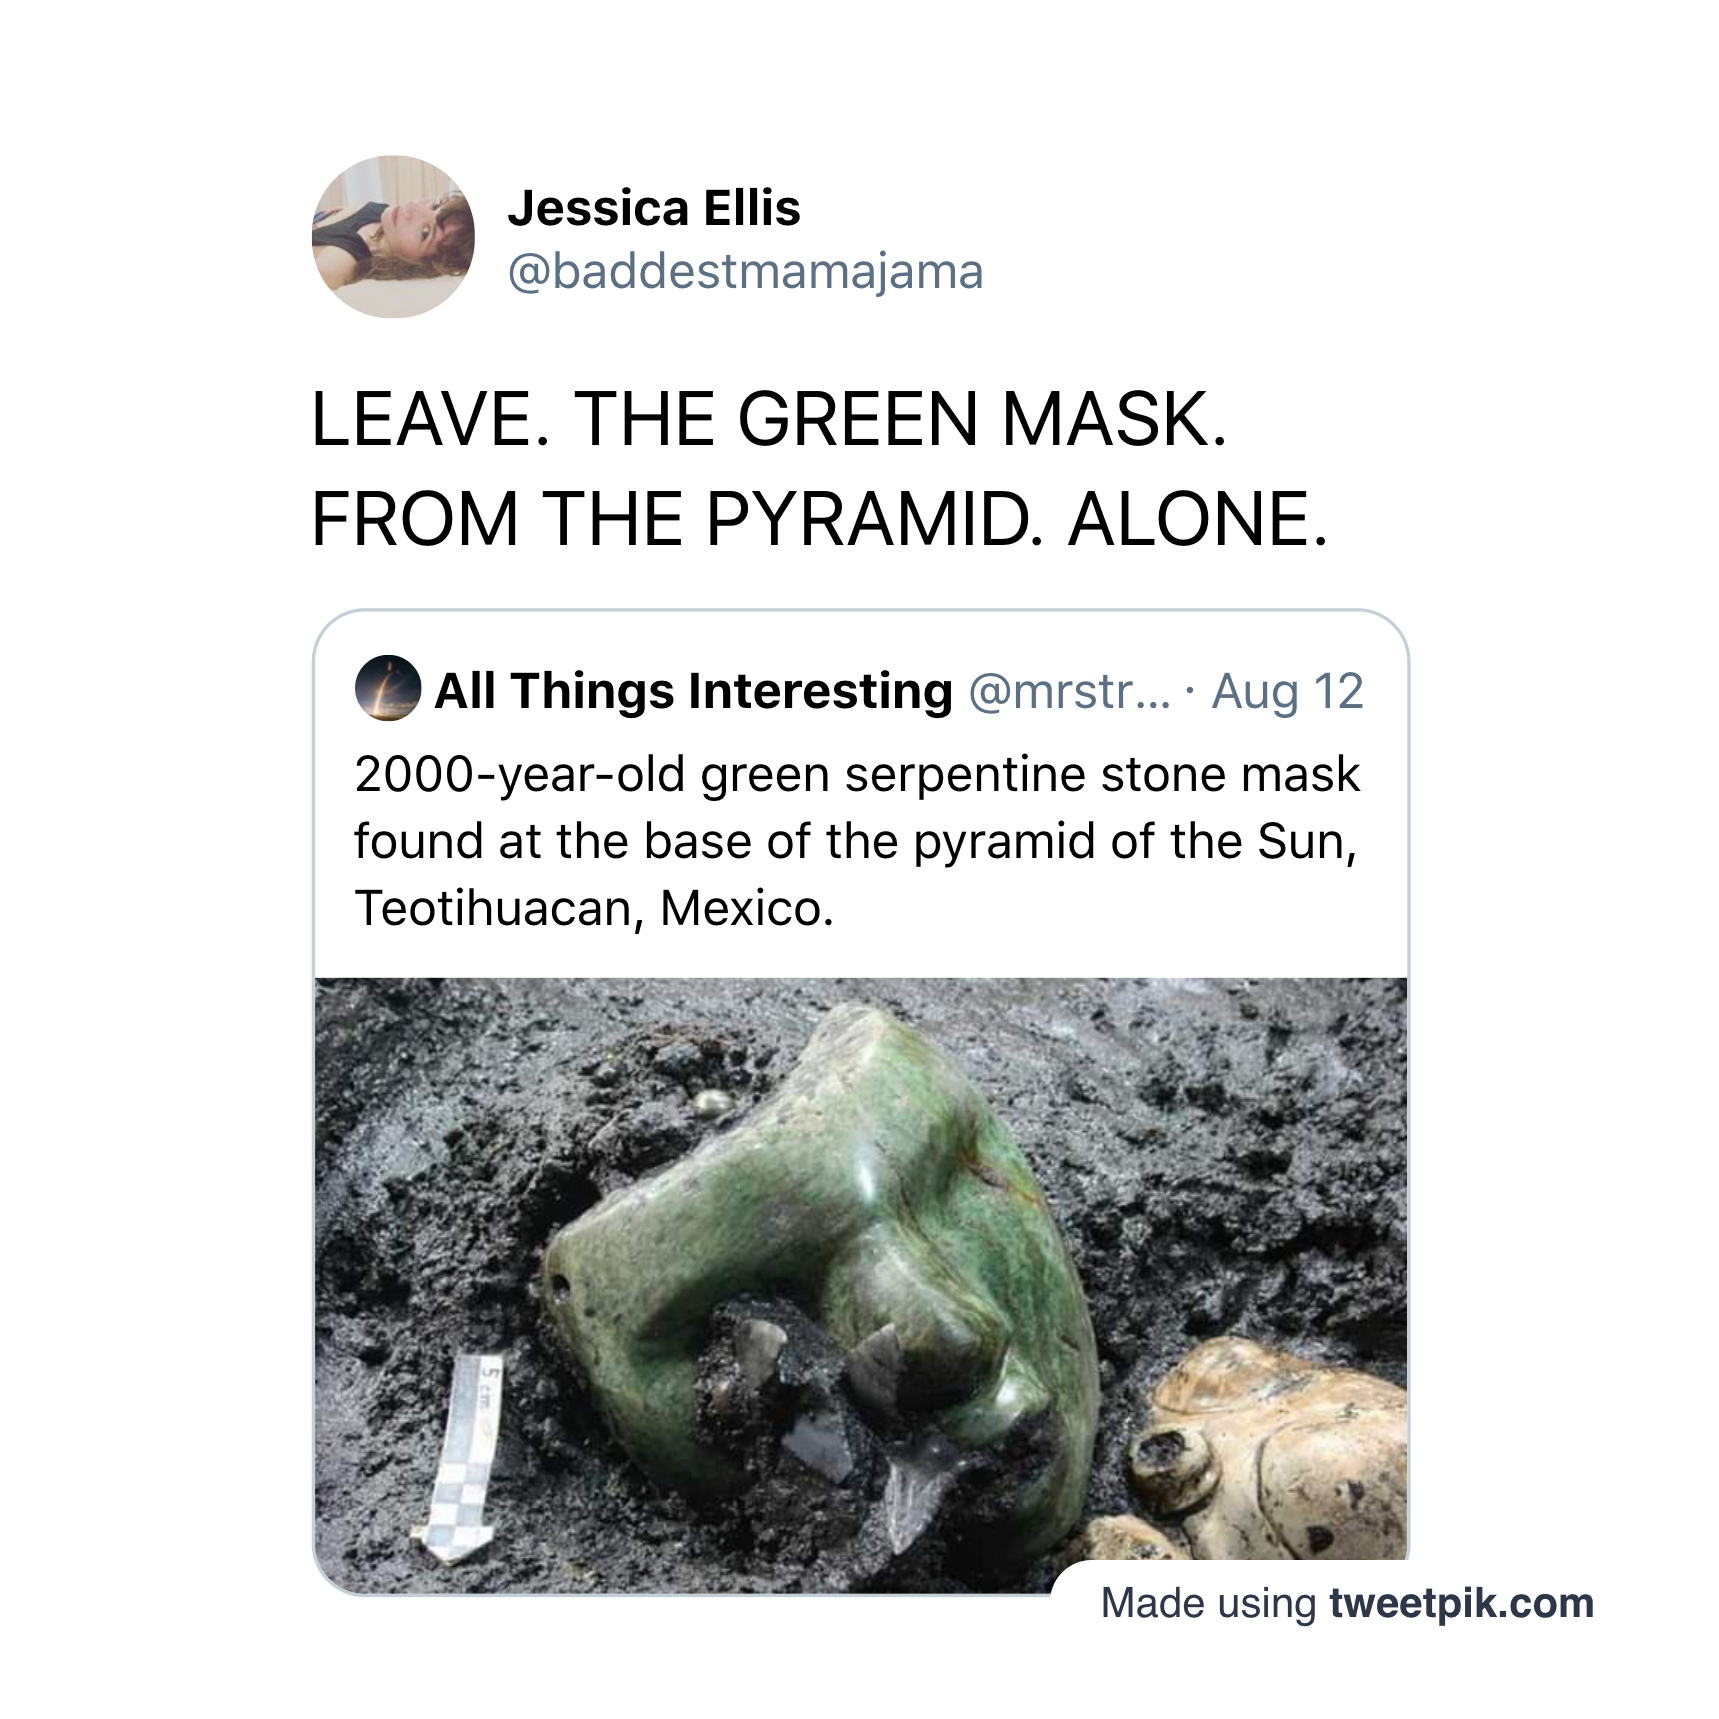 stone mask found in mexico - Jessica Ellis Leave. The Green Mask. From The Pyramid. Alone. All Things Interesting ... yearold green serpentine stone mask found at the base of the pyramid of the Sun, Teotihuacan, Mexico. Made using tweetpik.com